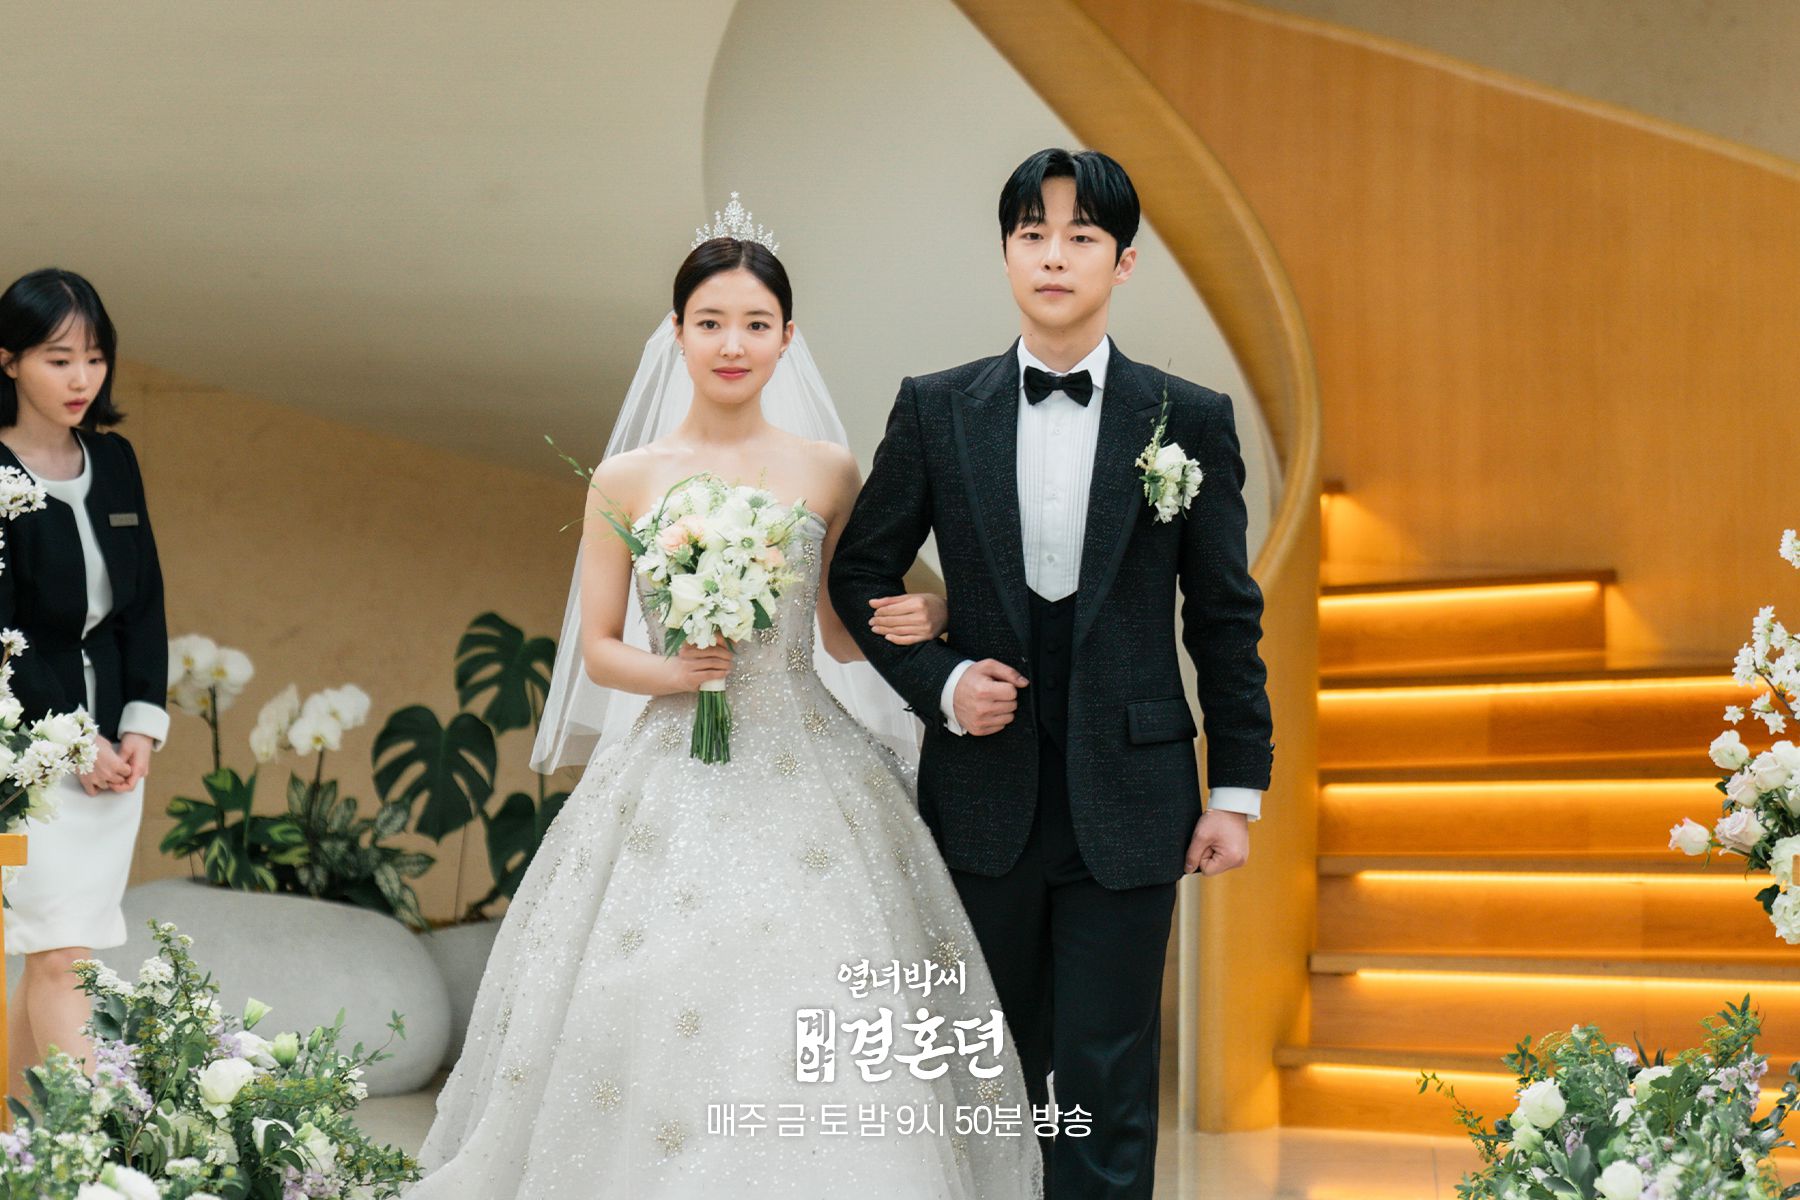 Sinopsis The Story of Park's Marriage Contract